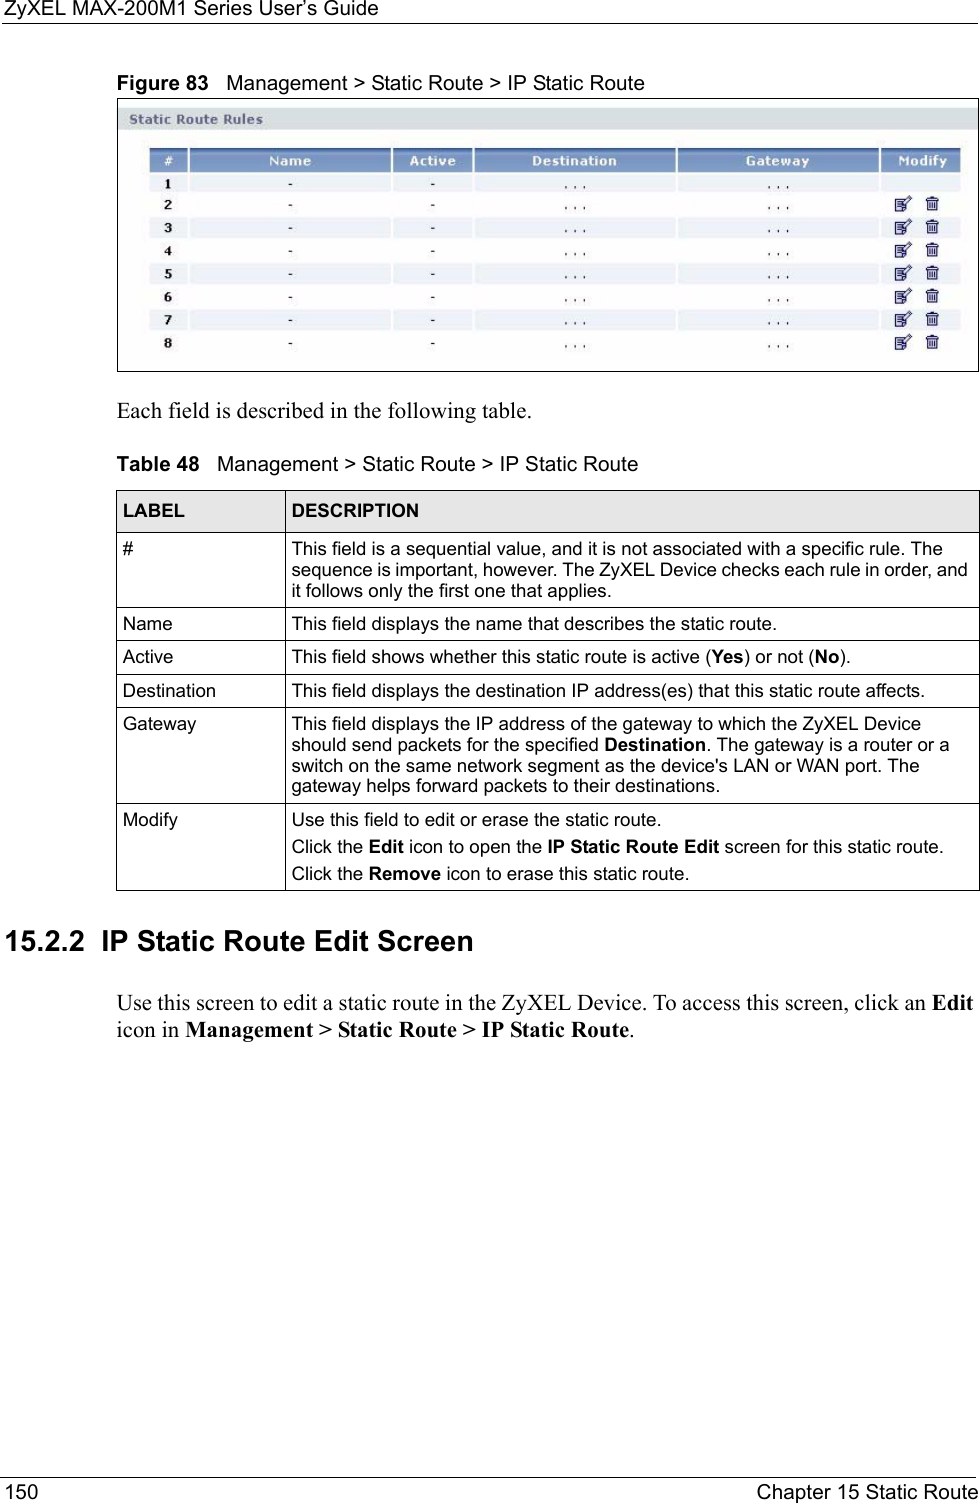 ZyXEL MAX-200M1 Series User’s Guide150 Chapter 15 Static RouteFigure 83   Management &gt; Static Route &gt; IP Static RouteEach field is described in the following table.15.2.2  IP Static Route Edit ScreenUse this screen to edit a static route in the ZyXEL Device. To access this screen, click an Edit icon in Management &gt; Static Route &gt; IP Static Route.Table 48   Management &gt; Static Route &gt; IP Static RouteLABEL DESCRIPTION#This field is a sequential value, and it is not associated with a specific rule. The sequence is important, however. The ZyXEL Device checks each rule in order, and it follows only the first one that applies.Name This field displays the name that describes the static route.Active This field shows whether this static route is active (Yes) or not (No).Destination This field displays the destination IP address(es) that this static route affects.Gateway This field displays the IP address of the gateway to which the ZyXEL Device should send packets for the specified Destination. The gateway is a router or a switch on the same network segment as the device&apos;s LAN or WAN port. The gateway helps forward packets to their destinations.Modify Use this field to edit or erase the static route.Click the Edit icon to open the IP Static Route Edit screen for this static route.Click the Remove icon to erase this static route.